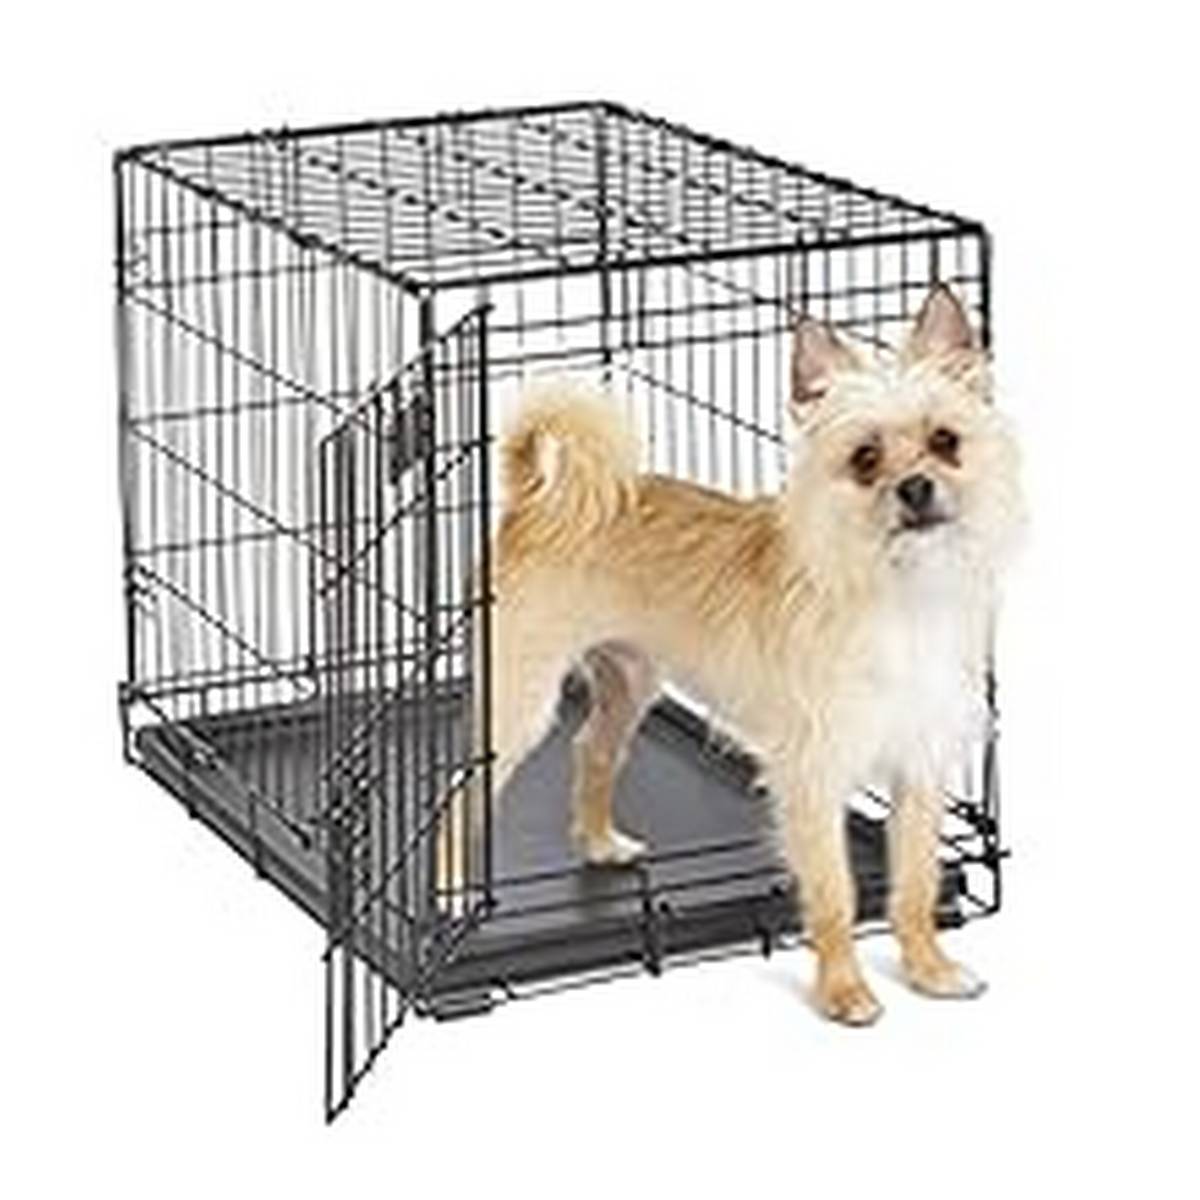 Supplies_MidWest Homes for Pets Newly Enhanced Single Door iCrate Dog Crate- Includes Leak-Proof Pan Floor Protecting Feet Divider Panel & New Patented Features